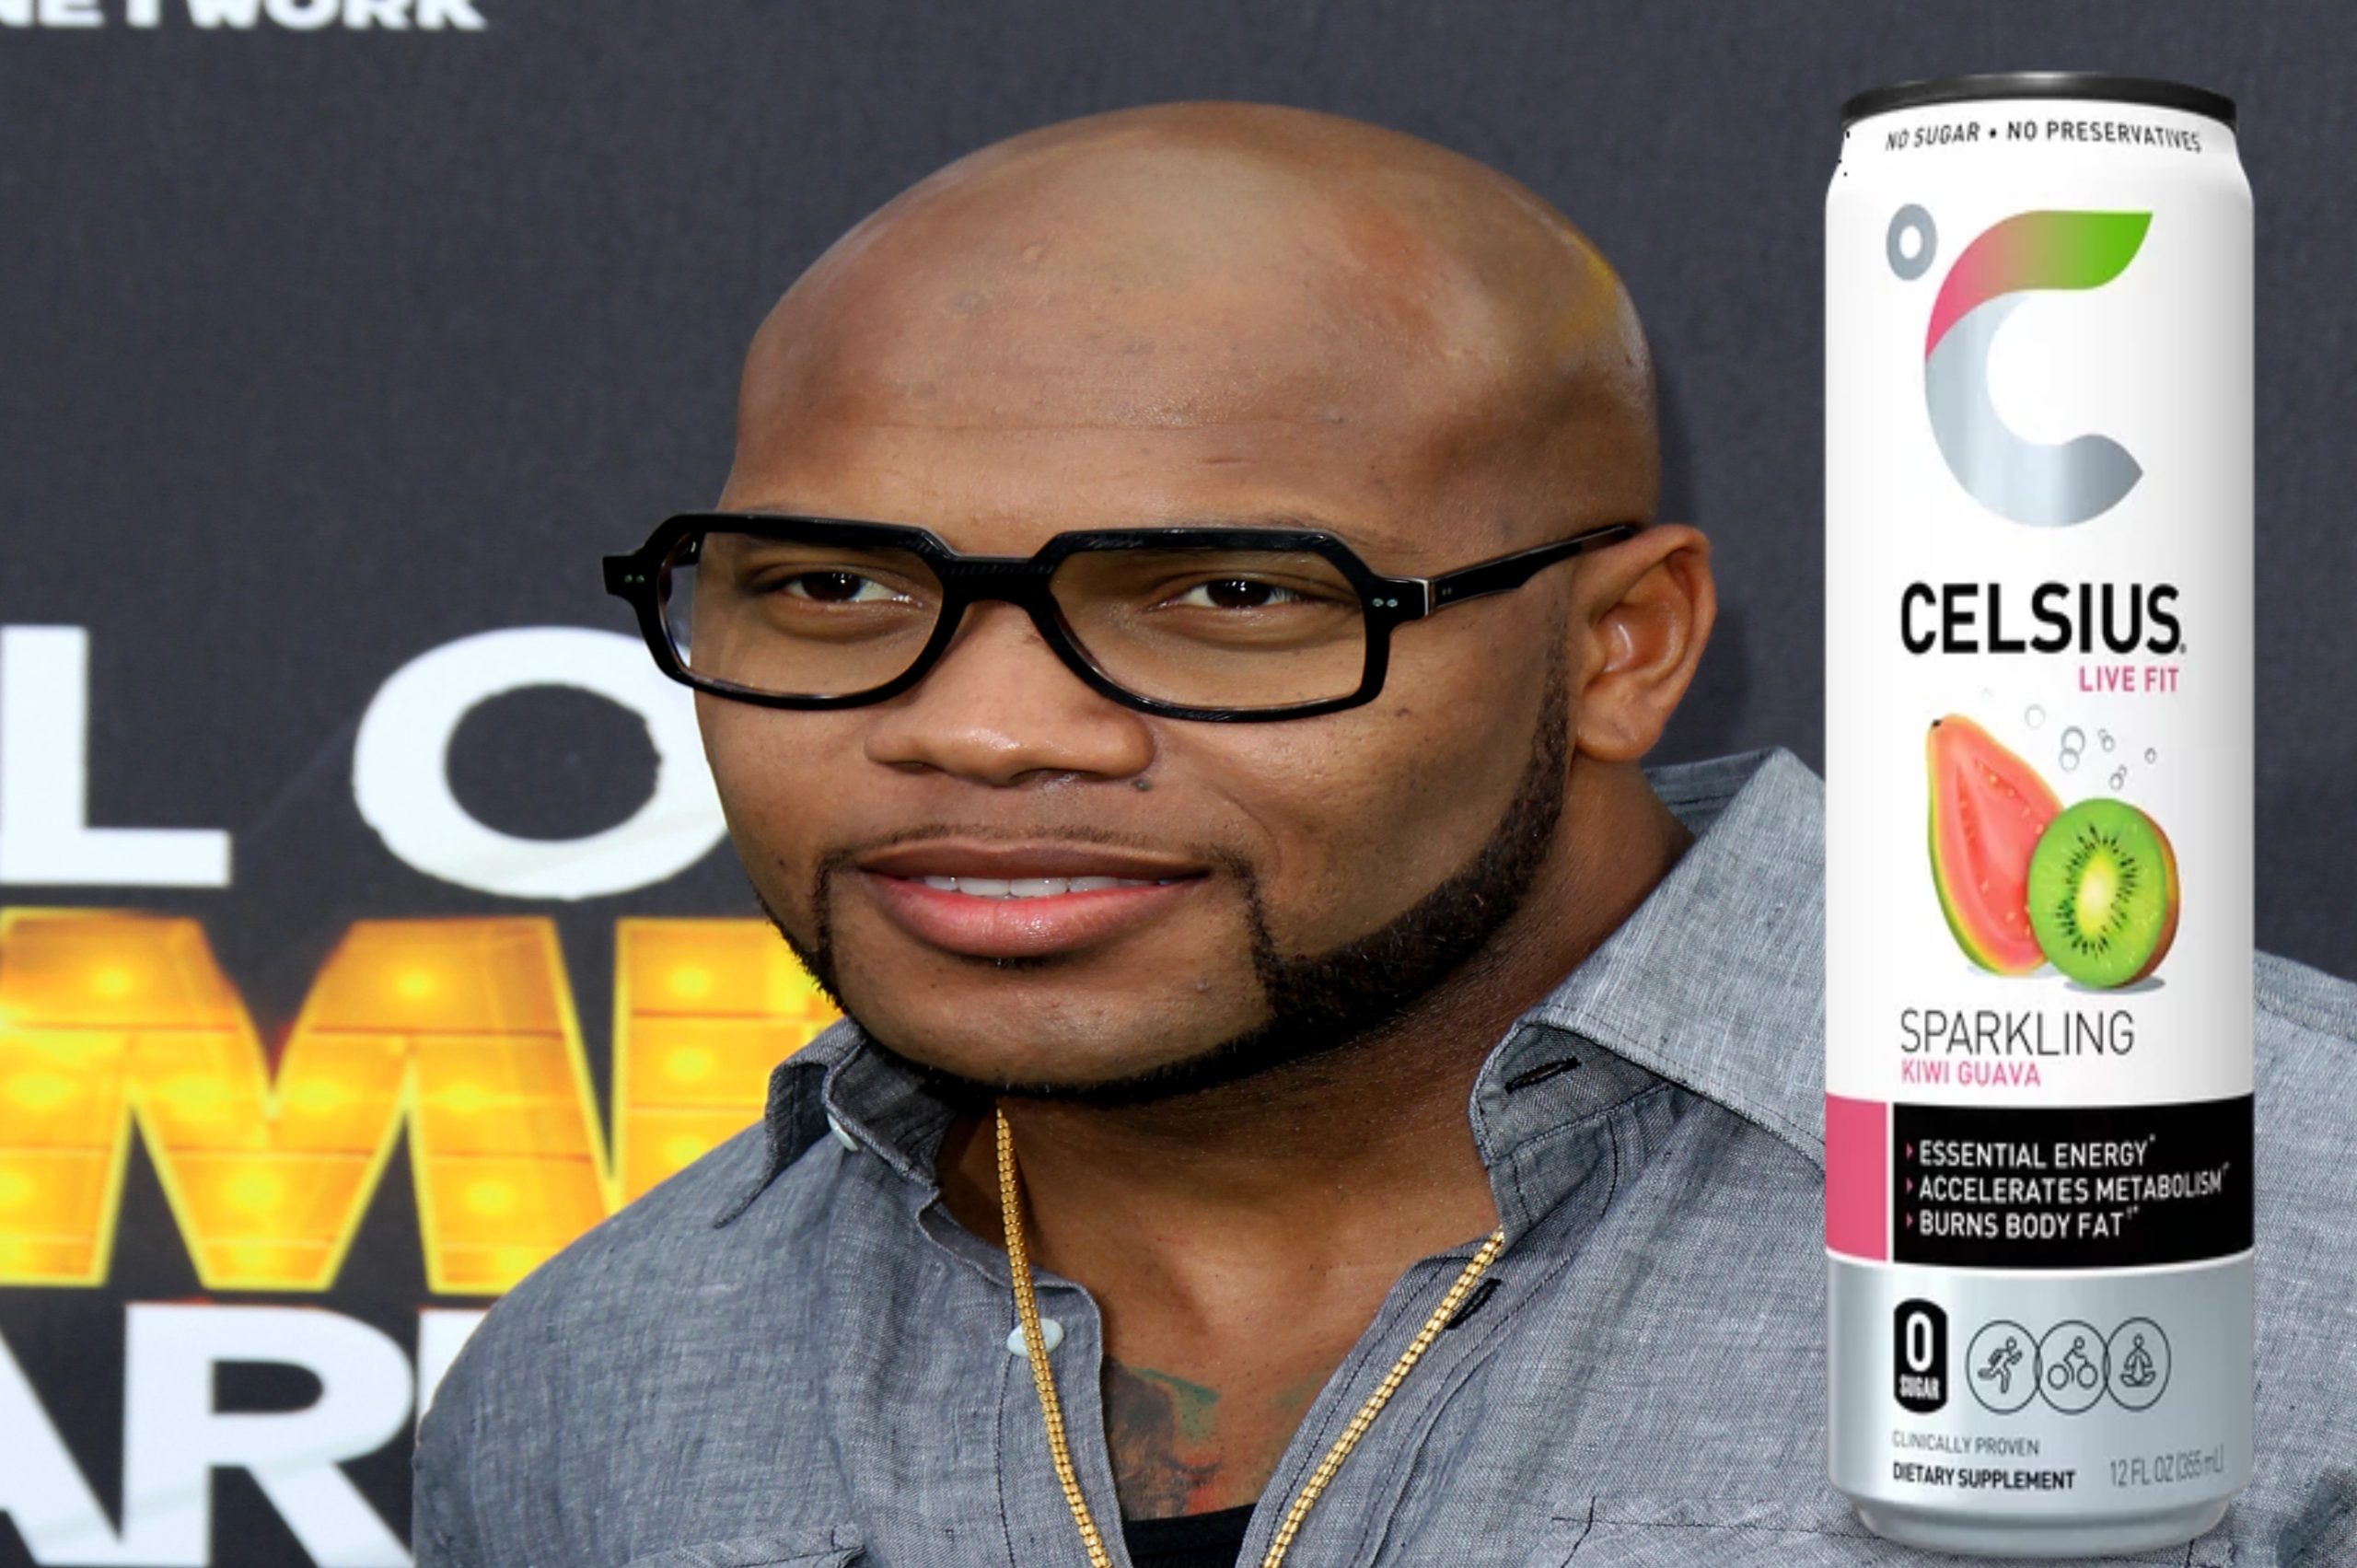 Watch: Celebrity Rapper Flo Rida Awarded $82 million by jury in lawsuit against Energy Drink Company Celsius